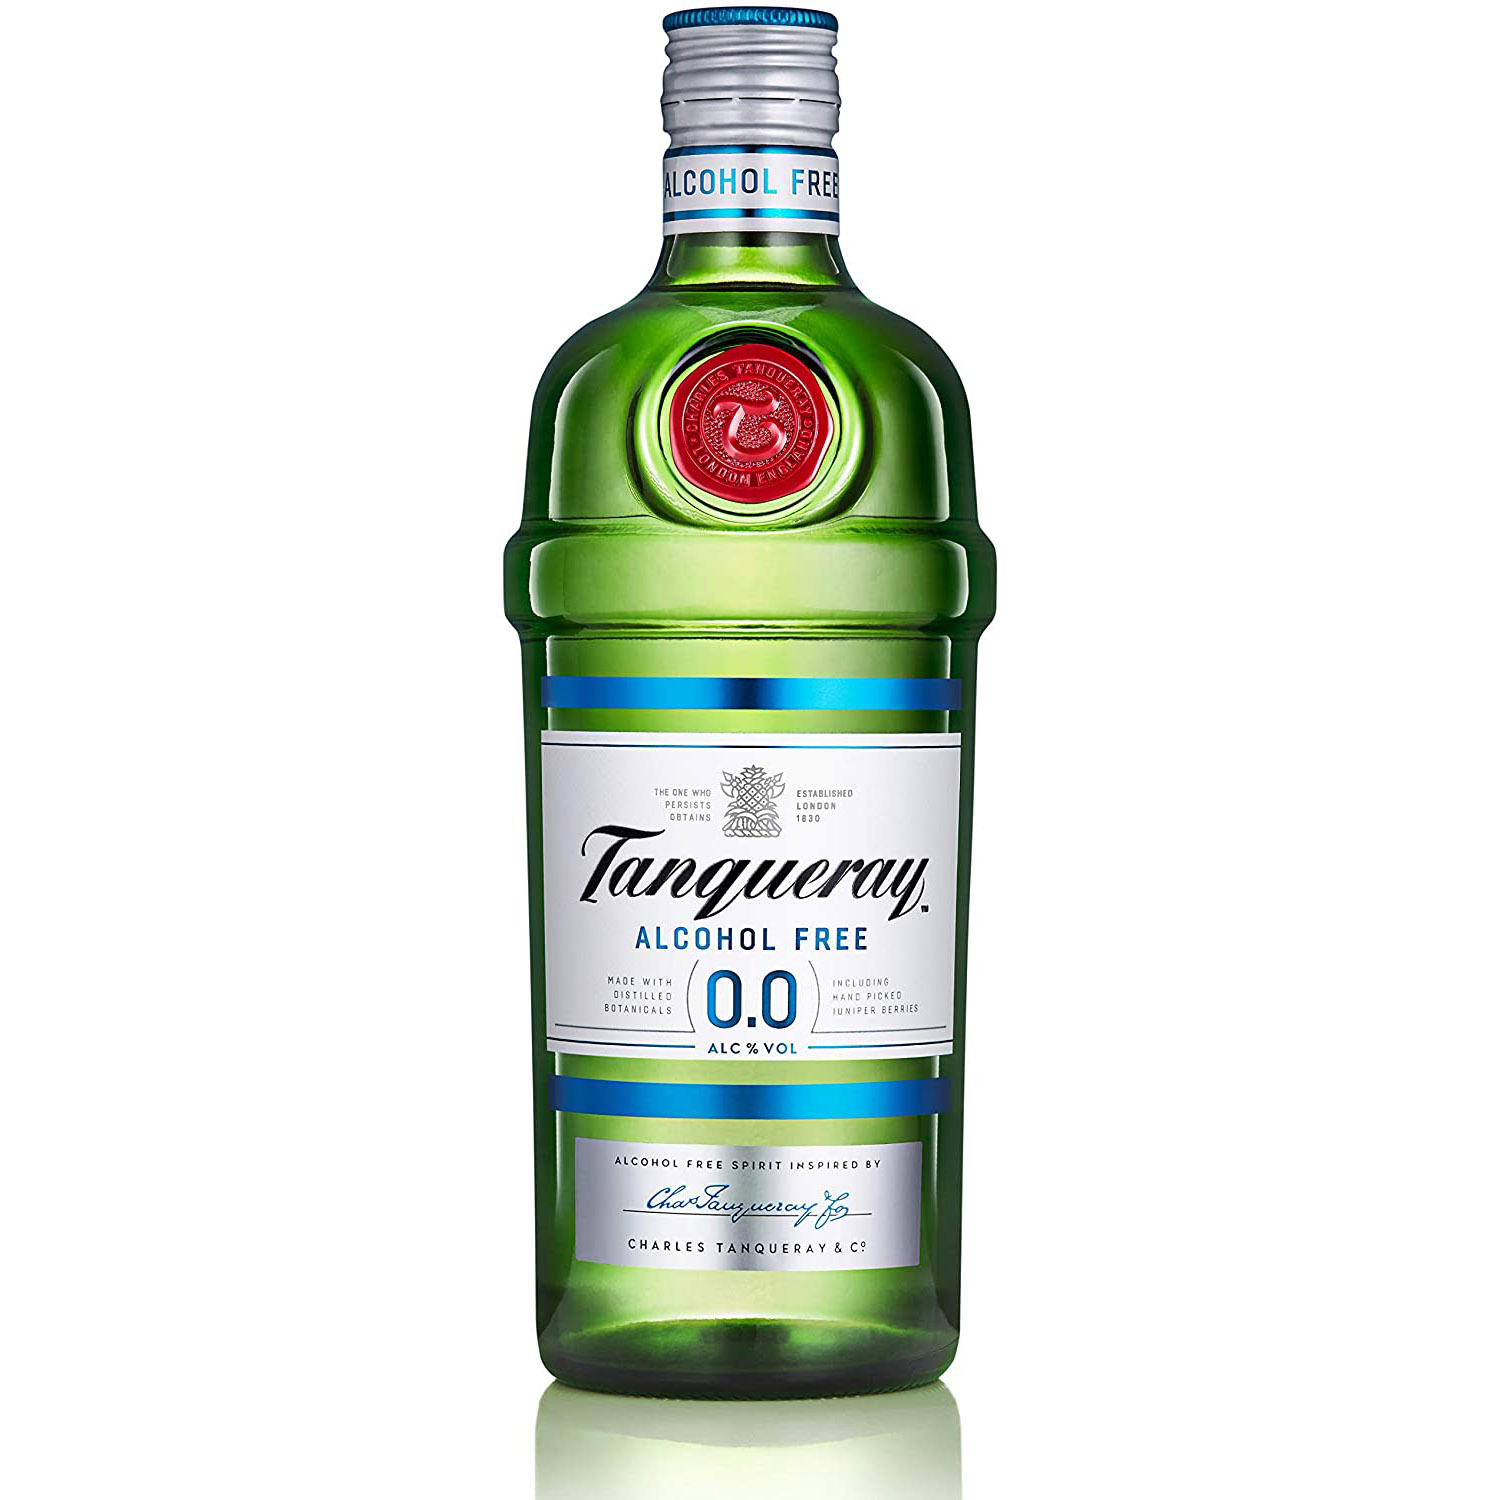 Tanqueray Alcohol Free 0.0% Gin 70cl